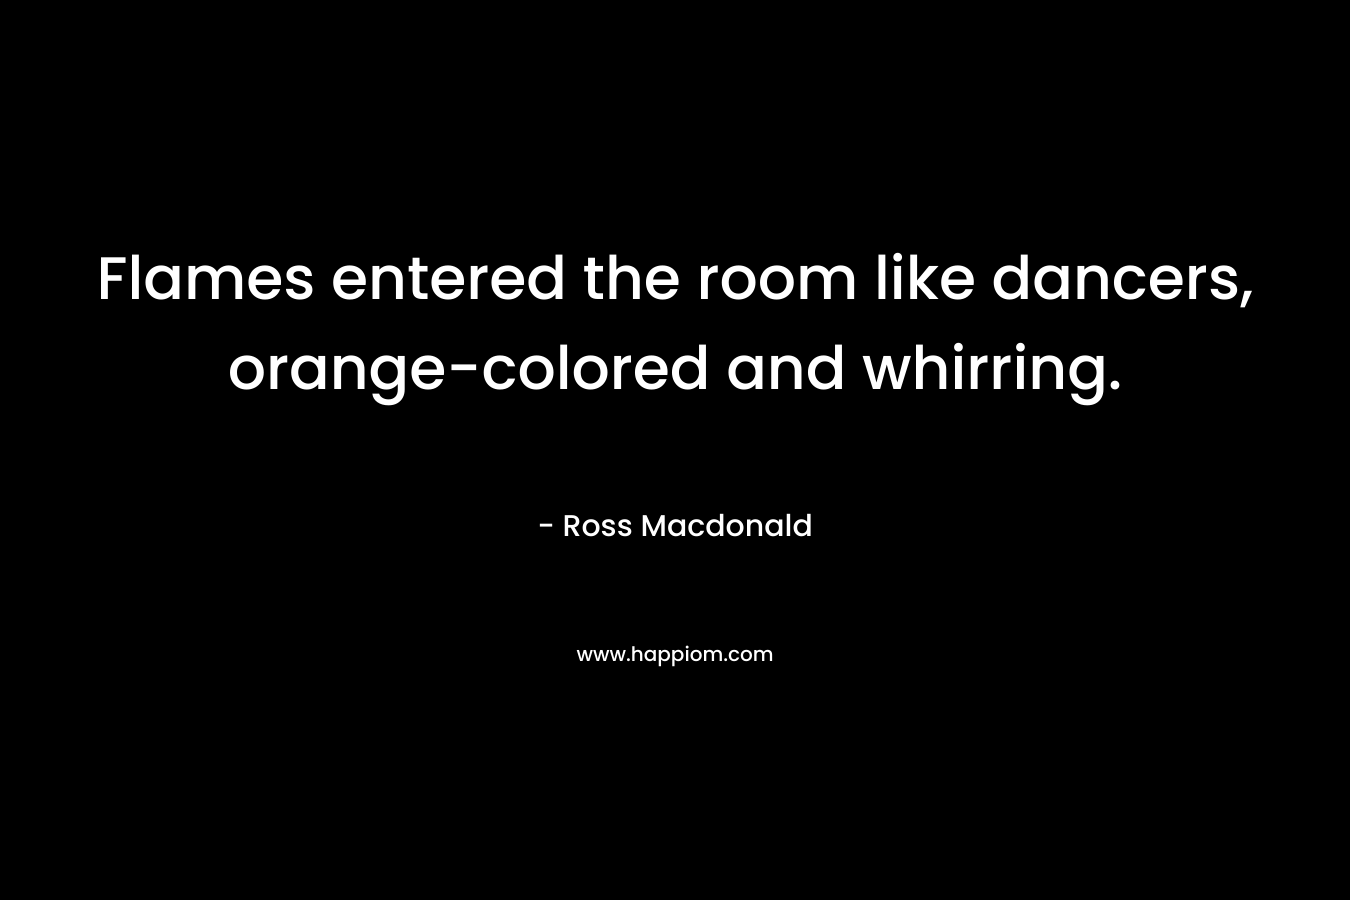 Flames entered the room like dancers, orange-colored and whirring. – Ross Macdonald